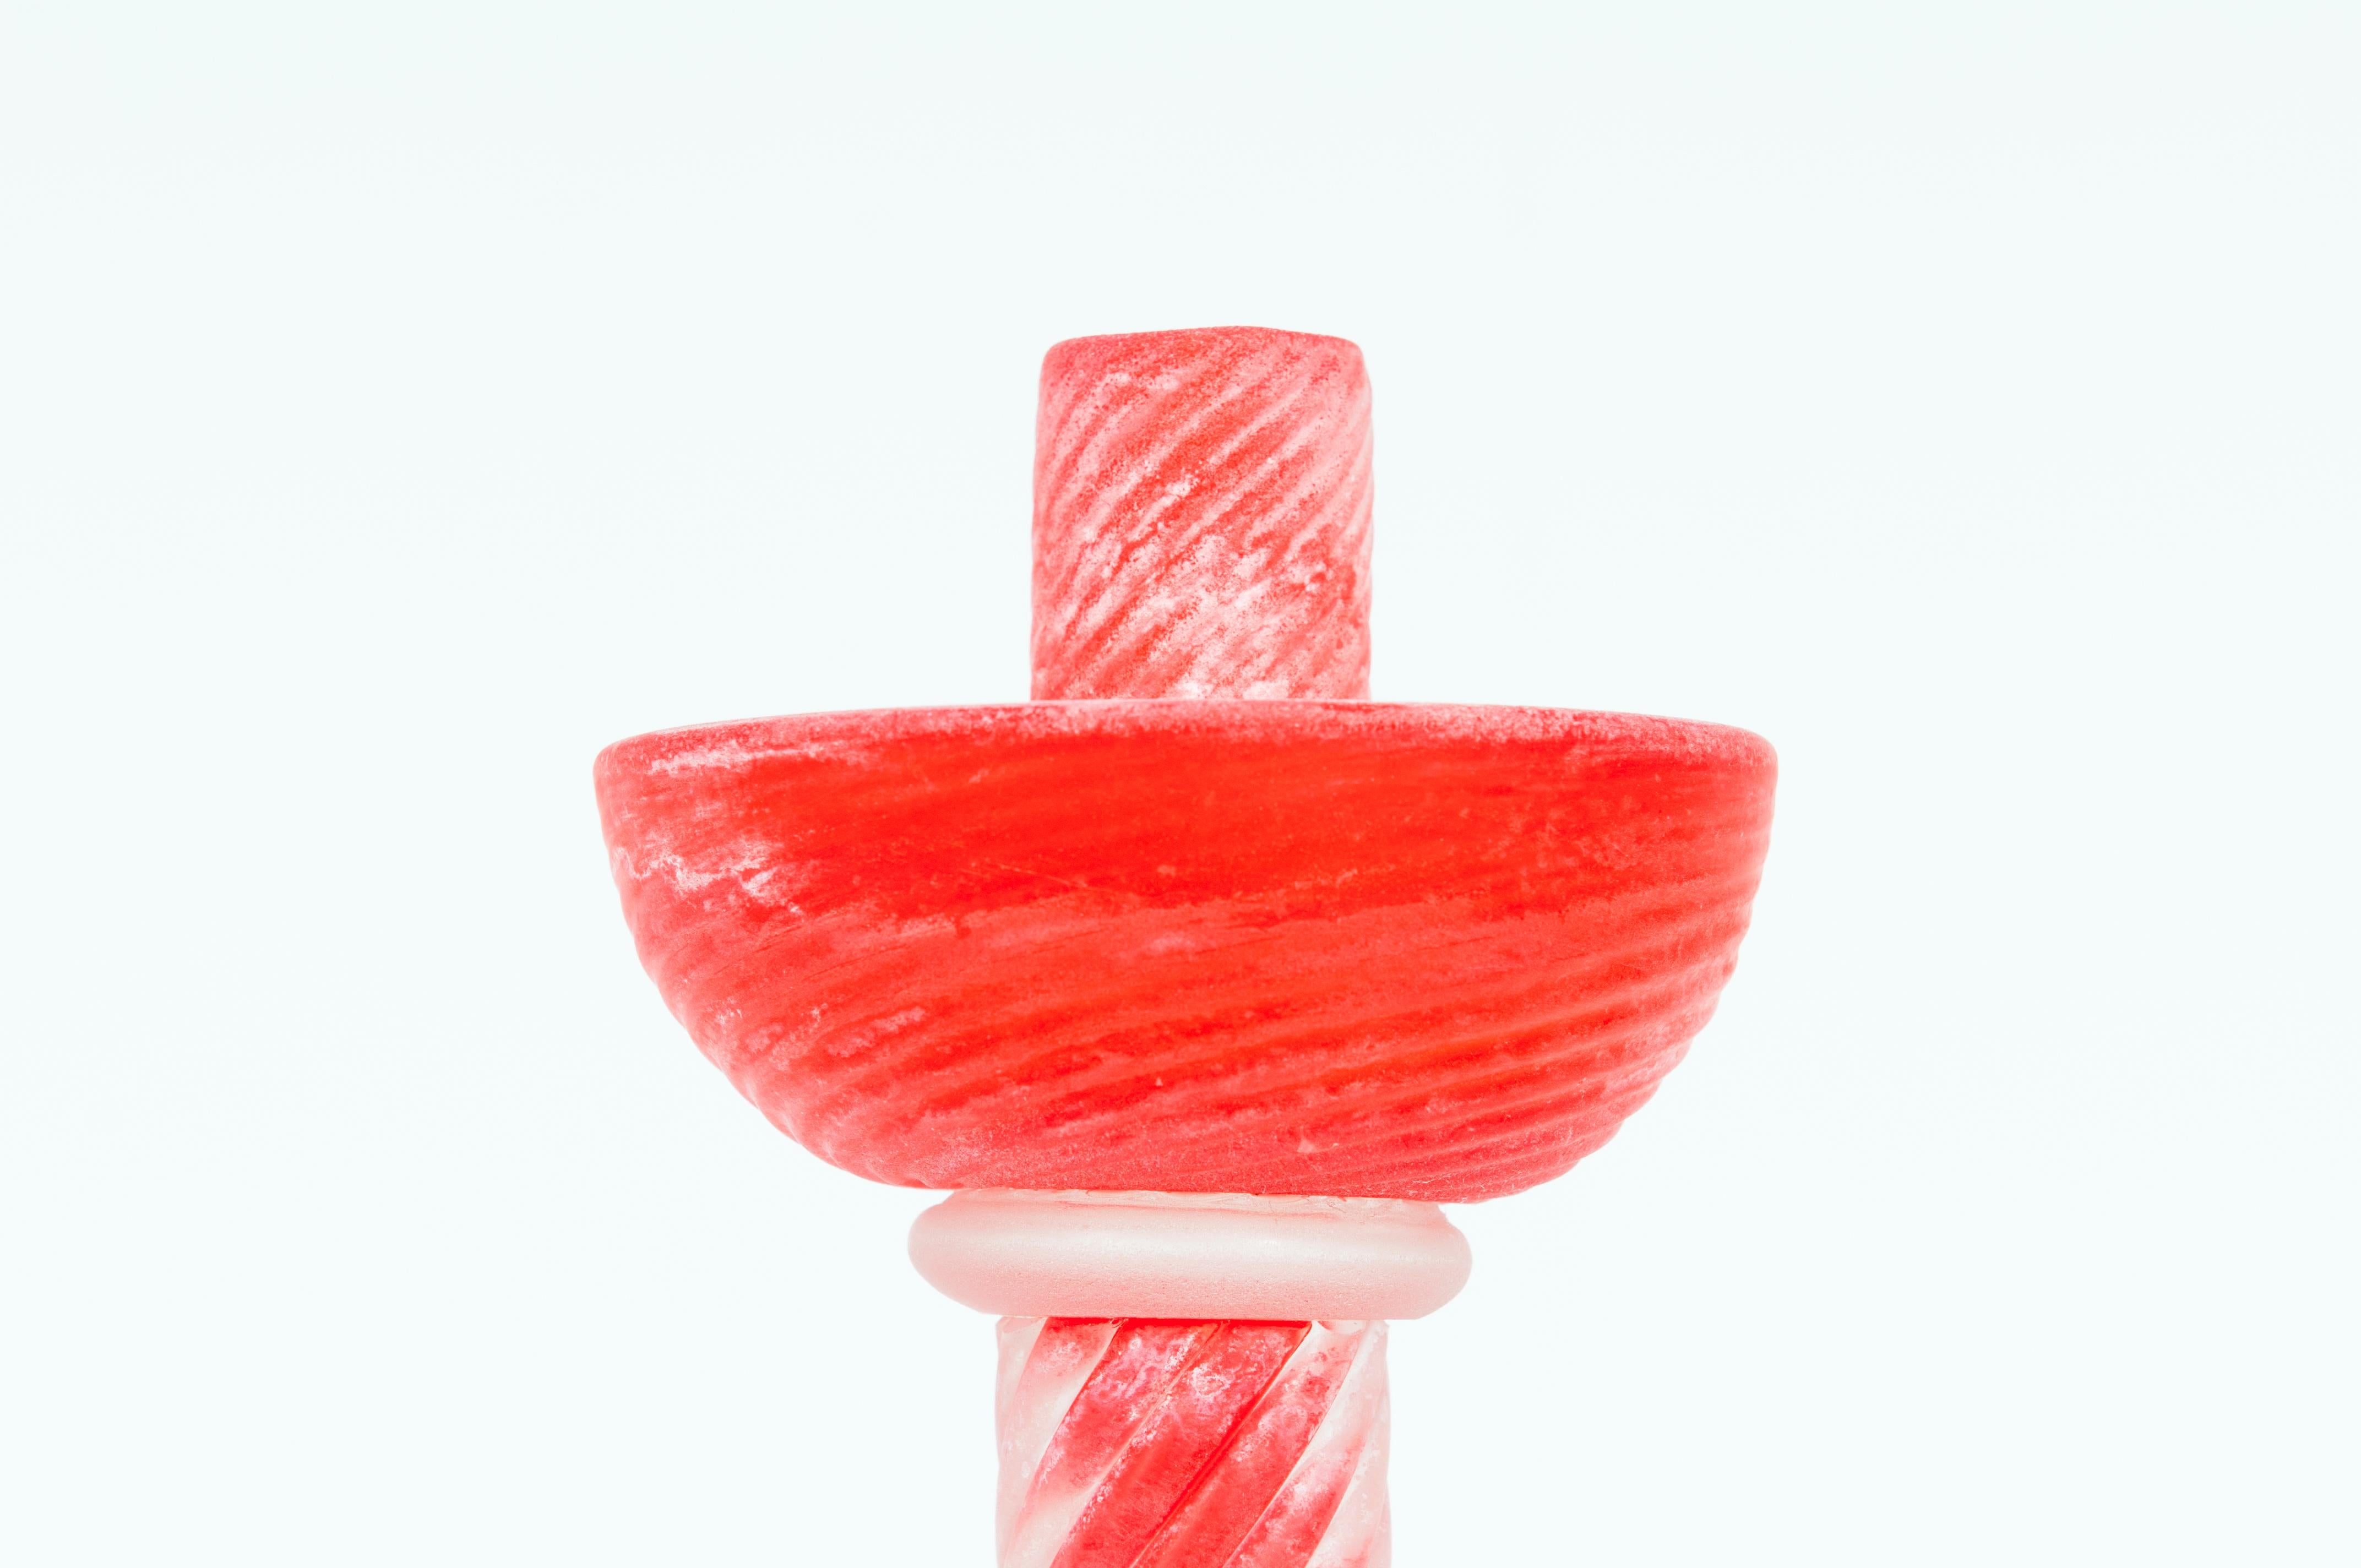 Late 20th Century Italian Venetian Murano Glass Scavo Candlestick 1980s Signed Cenedese For Sale